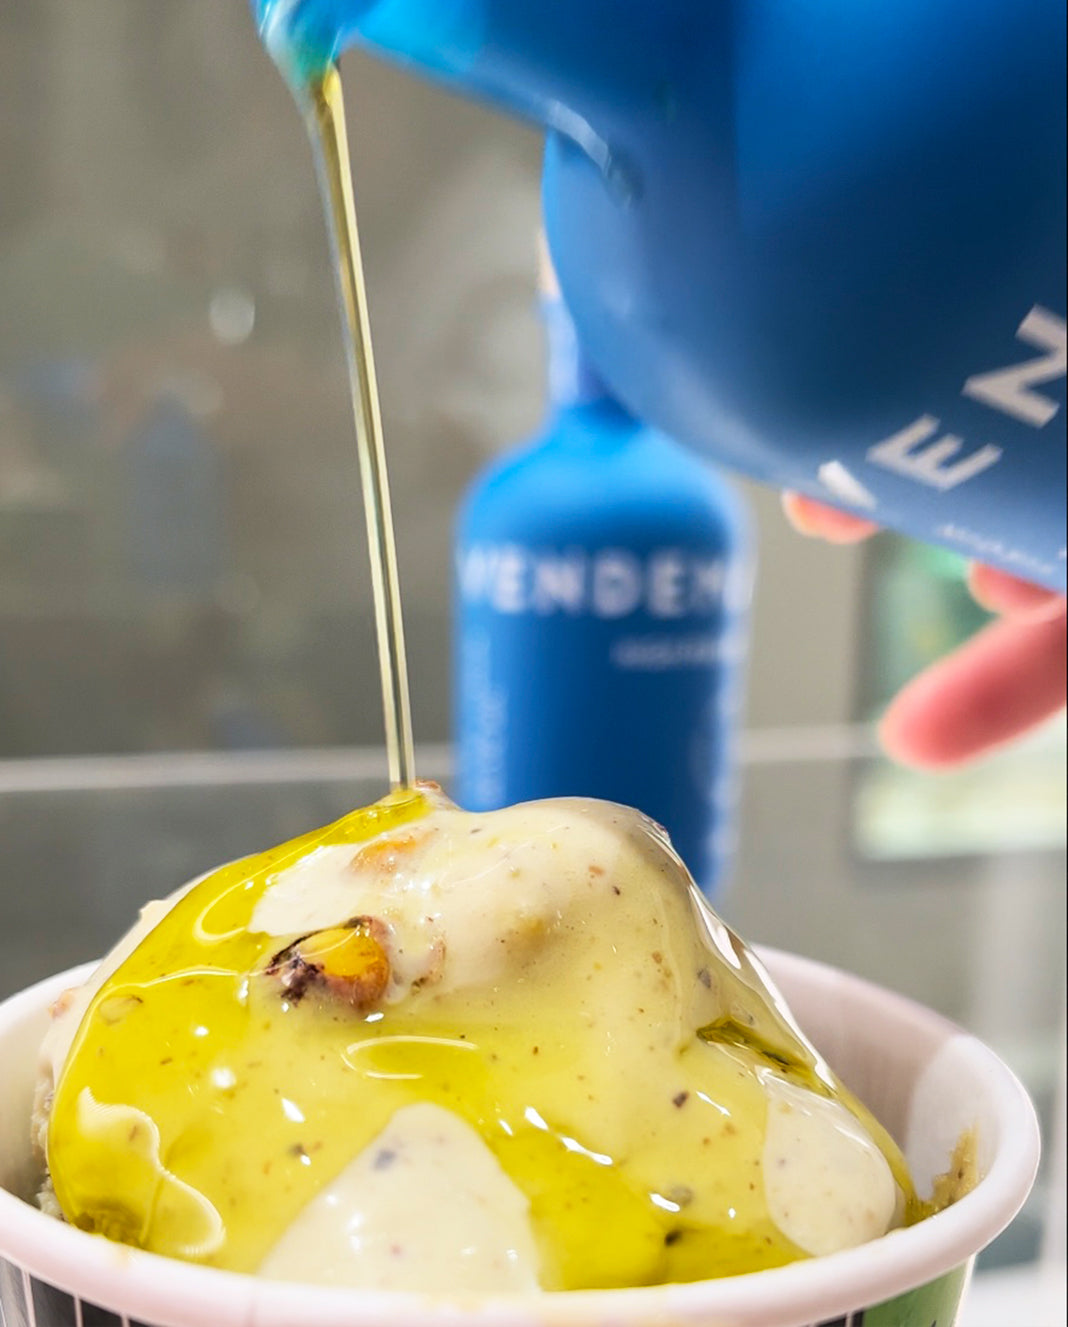 Pair your Vendema High Phenolic Extra Virgin Olive Oil with your ice cream.